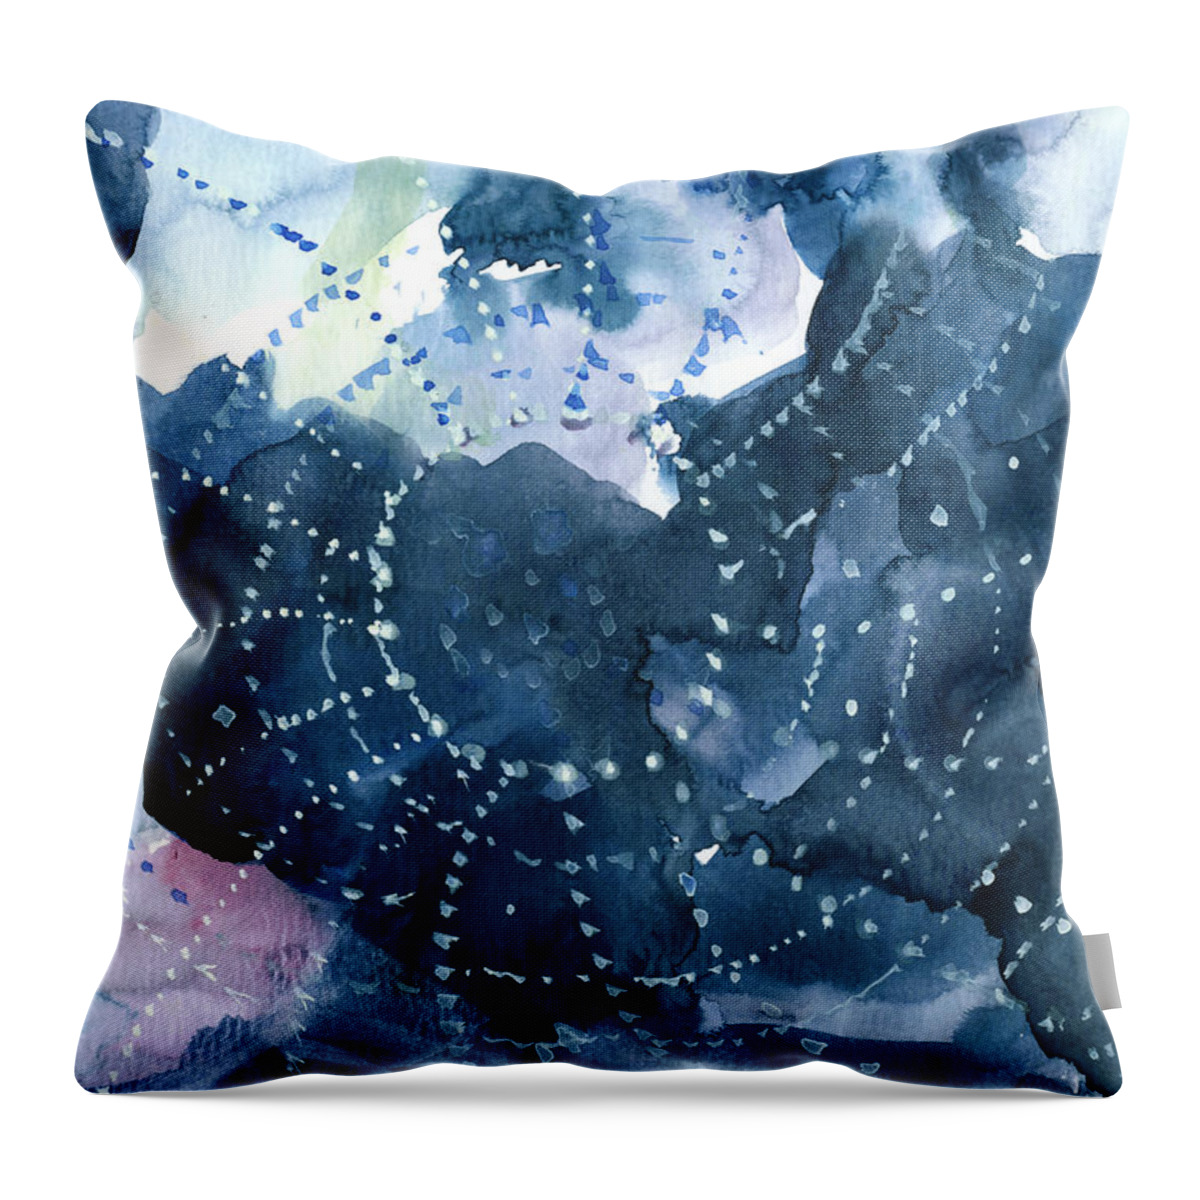 Spider Throw Pillow featuring the painting Waiting for a catch by Anil Nene